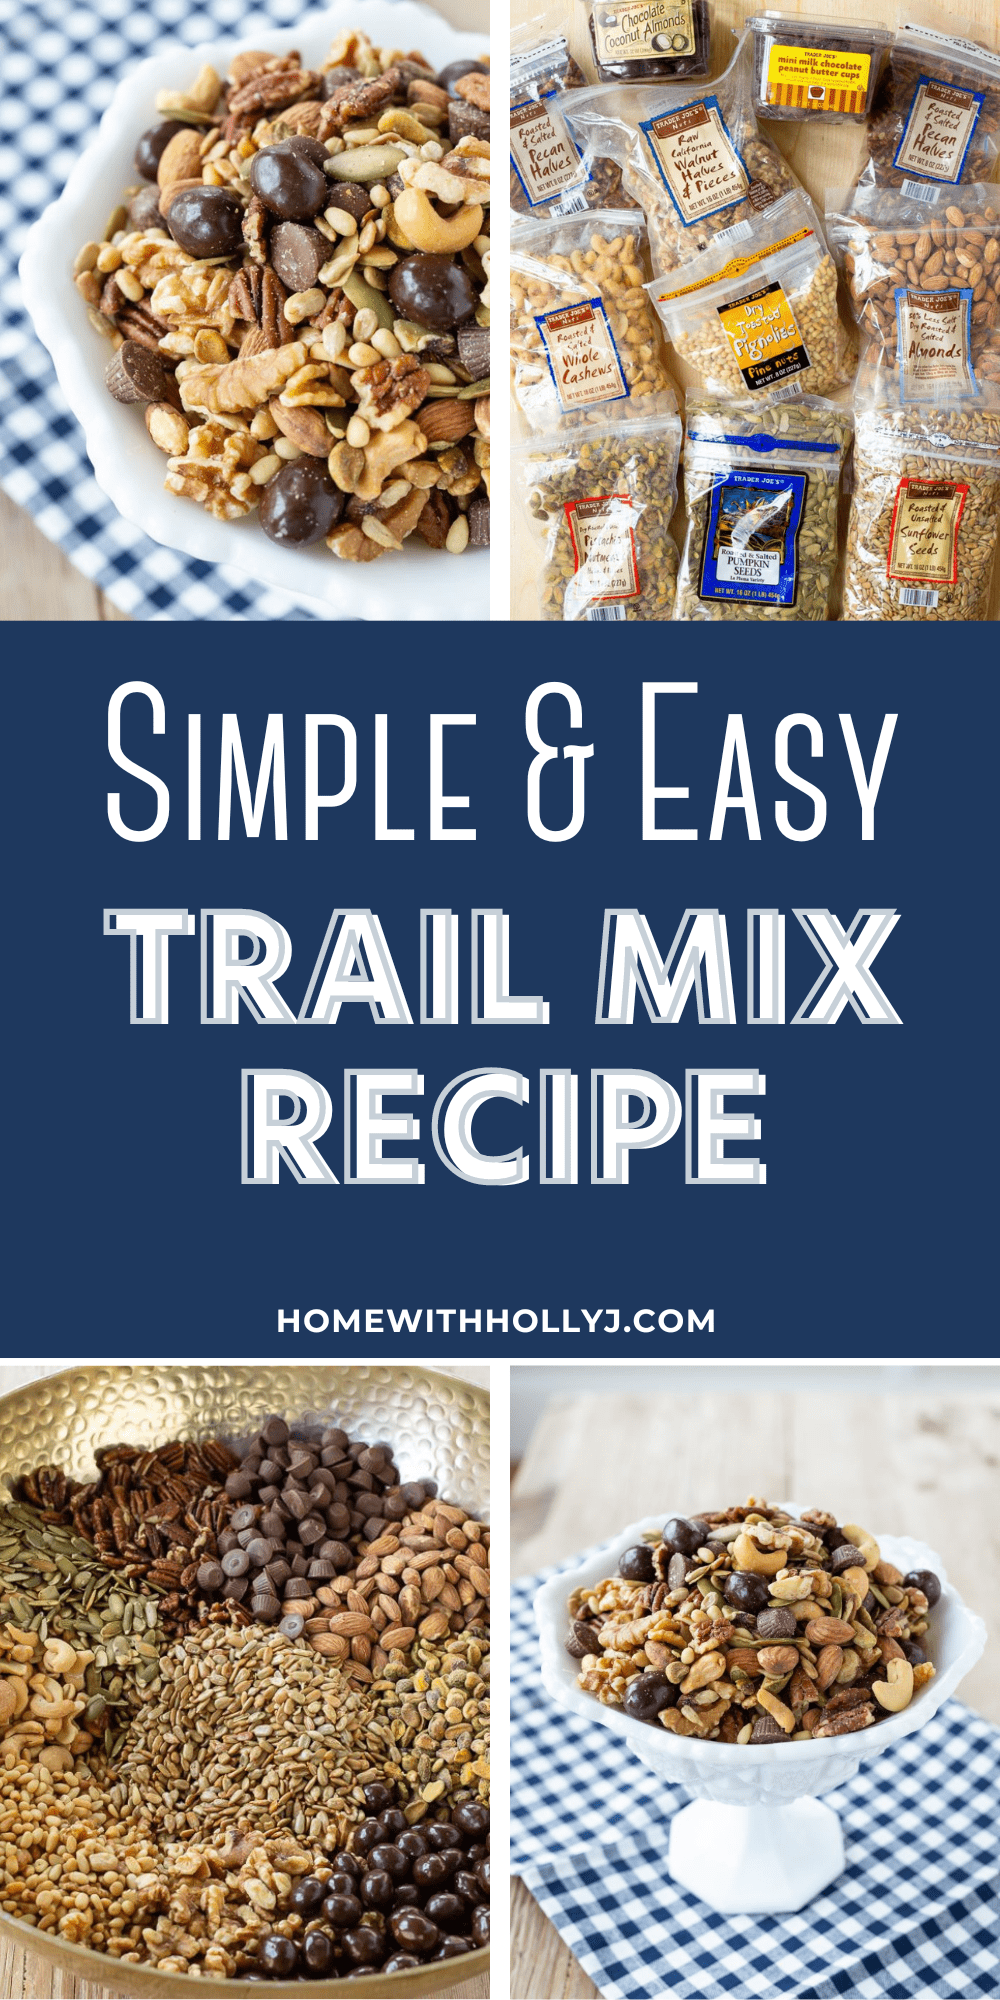 Sharing a simple trail mix recipe, including a variety of nuts, seeds, chocolate, and more - the perfect snack for any day.